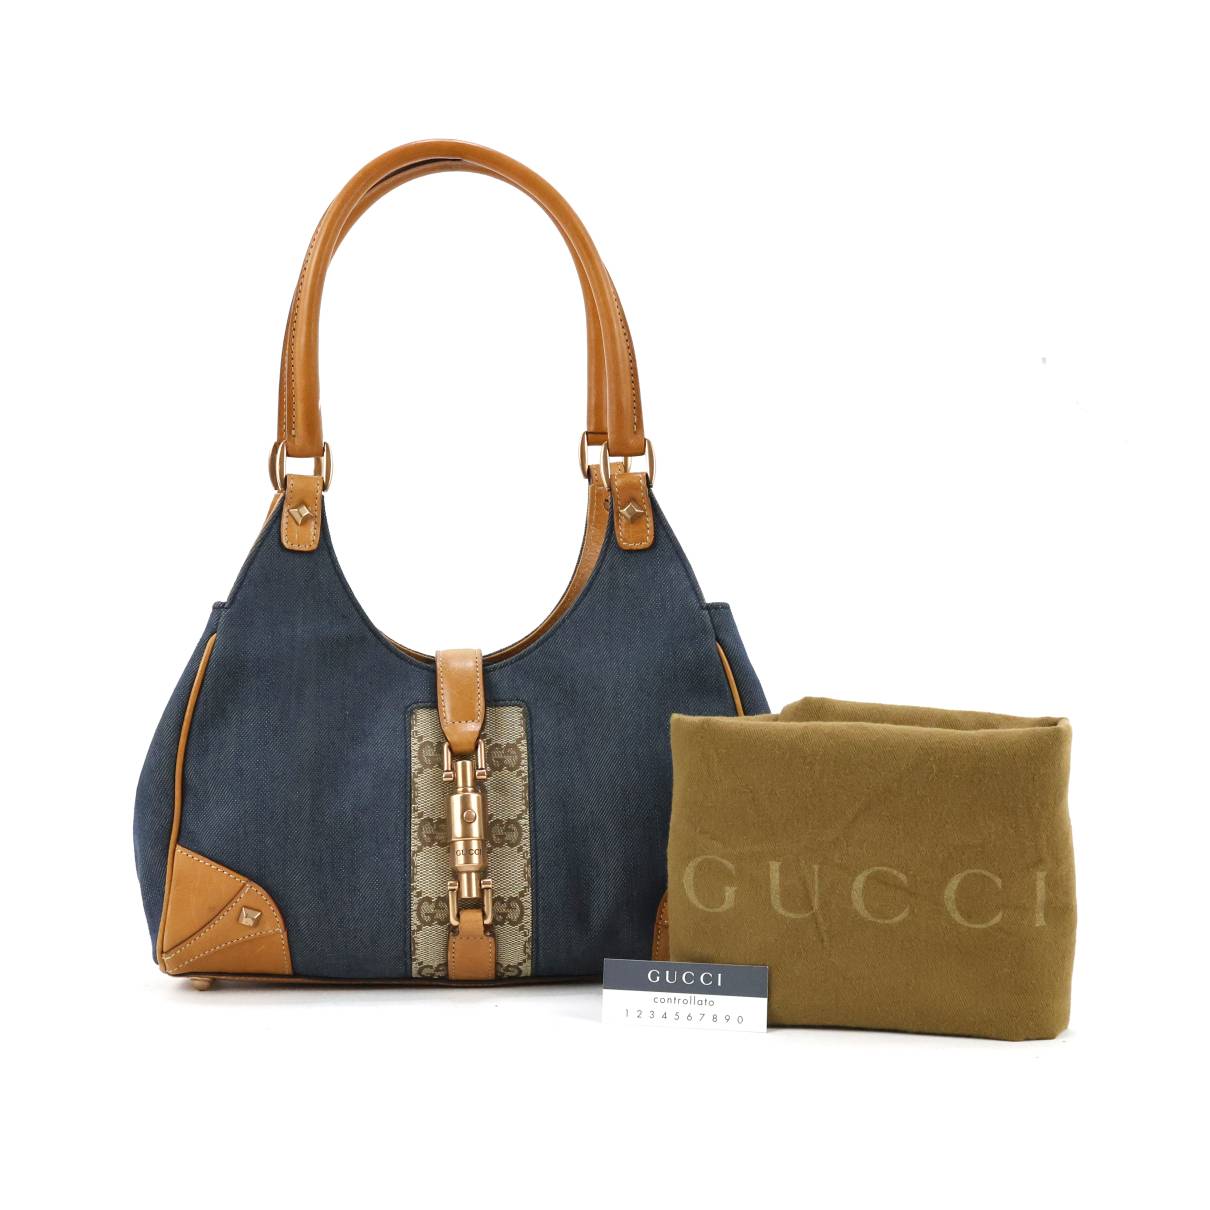 Gucci - Authenticated Jackie 1961 Handbag - Denim - Jeans Blue for Women, Very Good Condition